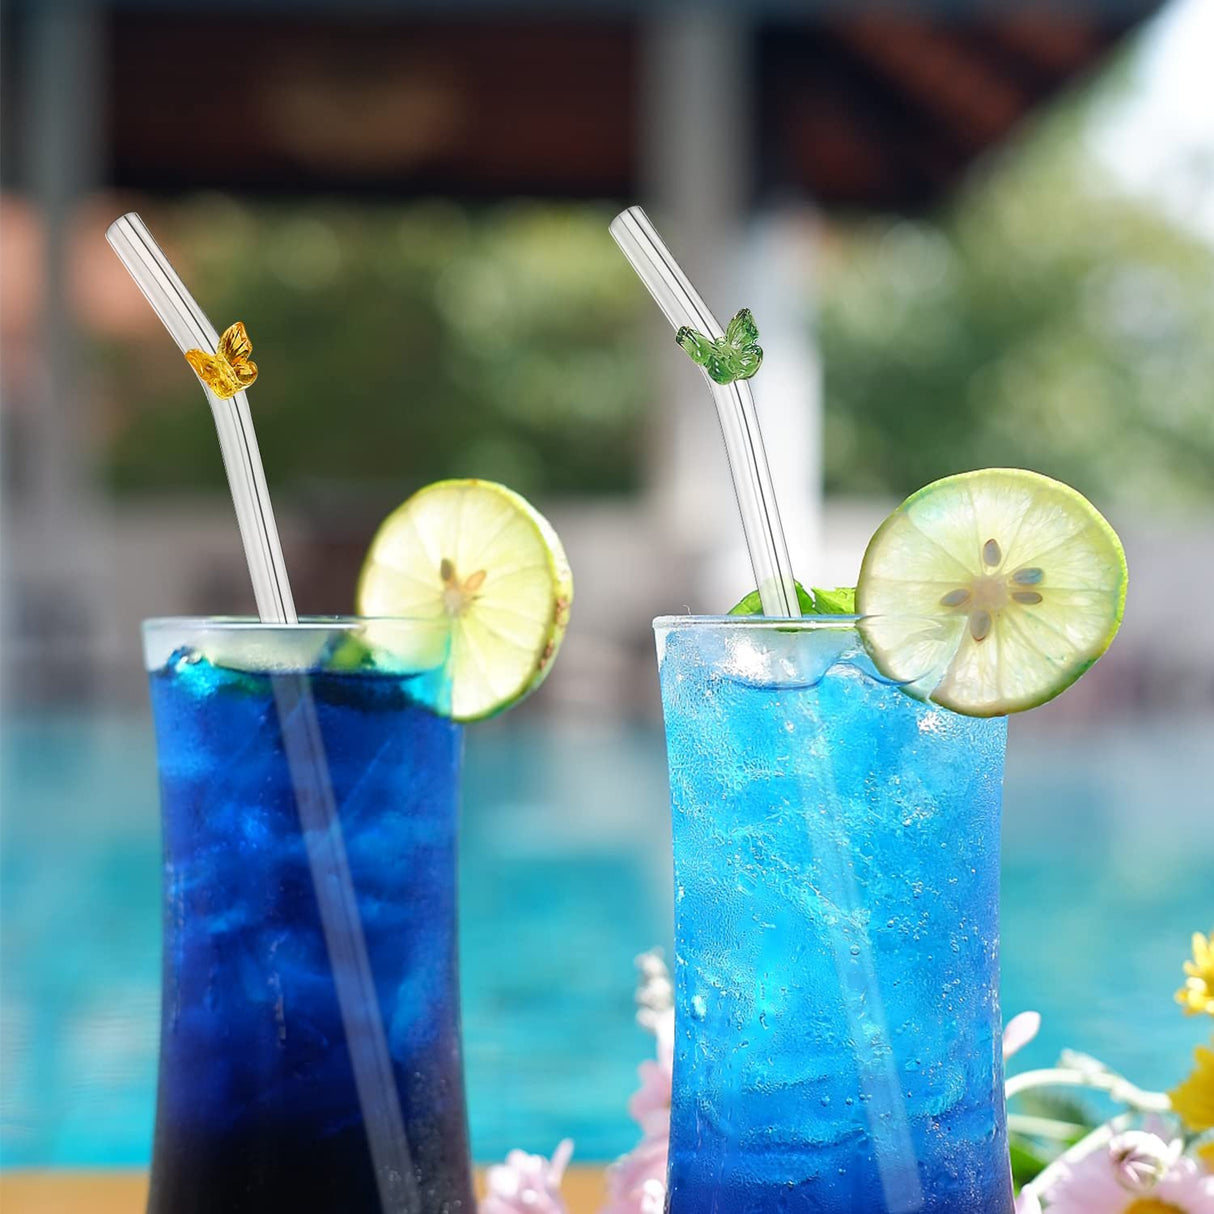 Enhance Your Drink with Colourful Butterfly Glass Straws